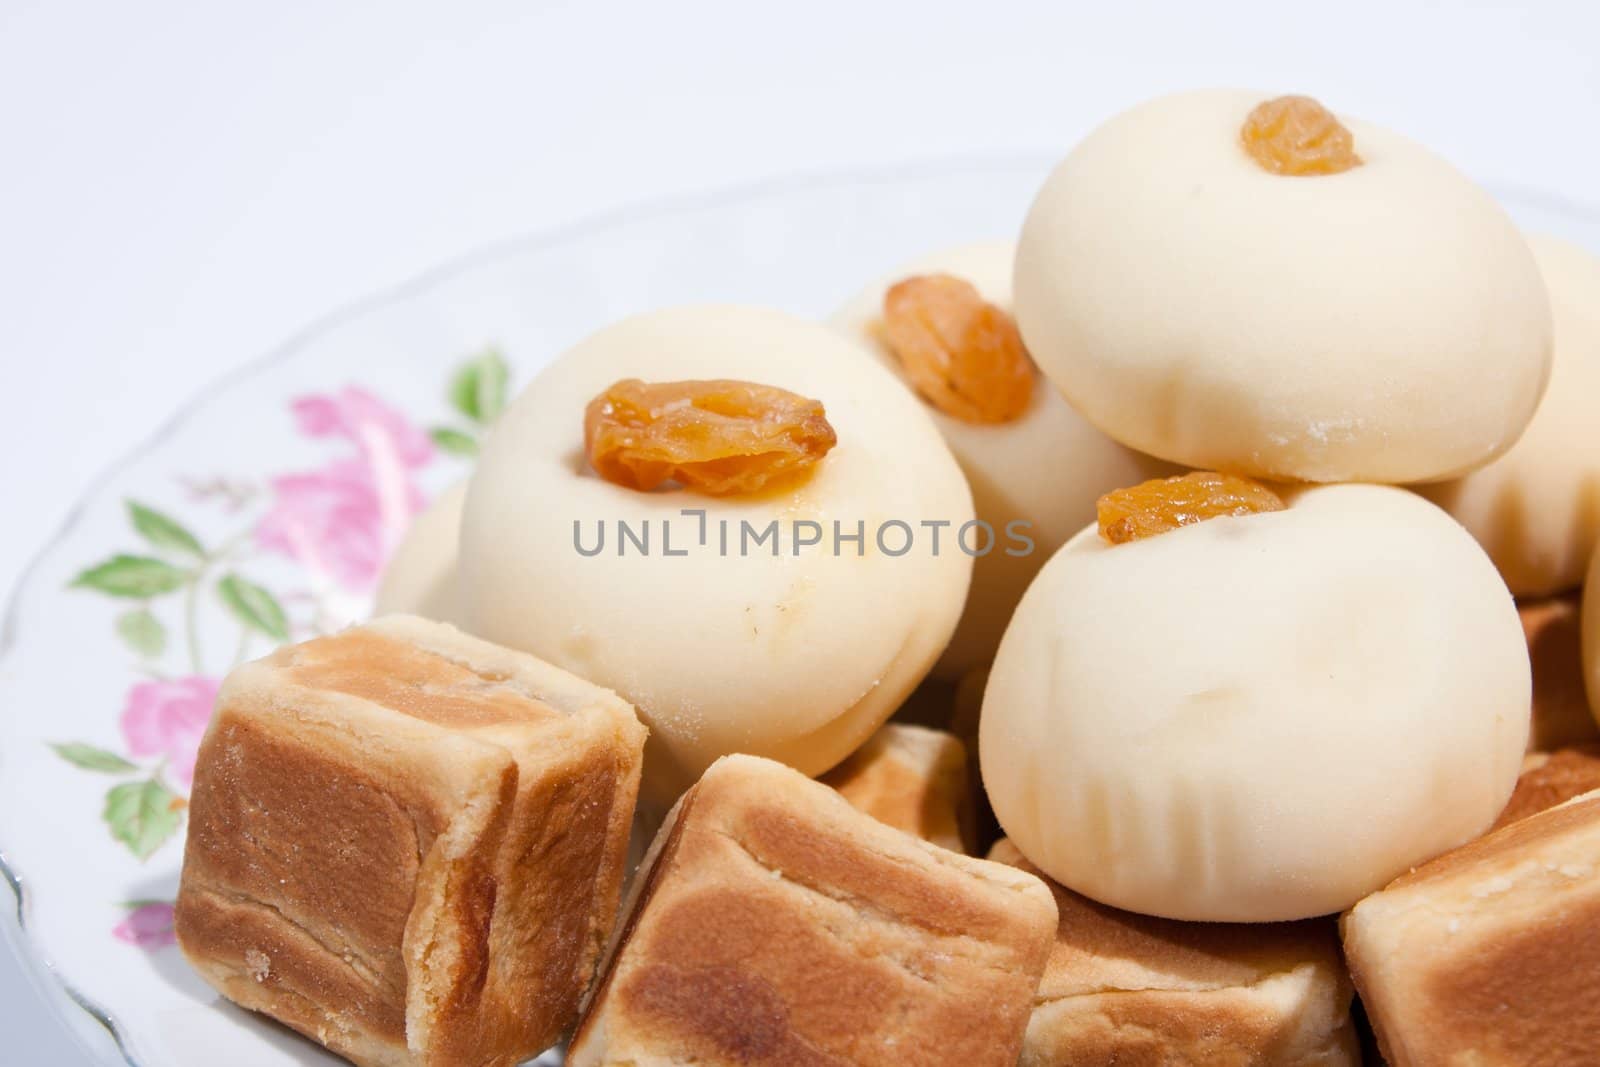 Thai dessert Moji Thai desserts and sweets to roll one more. Taste sweet. Arranged on the plate insert. On a white background.